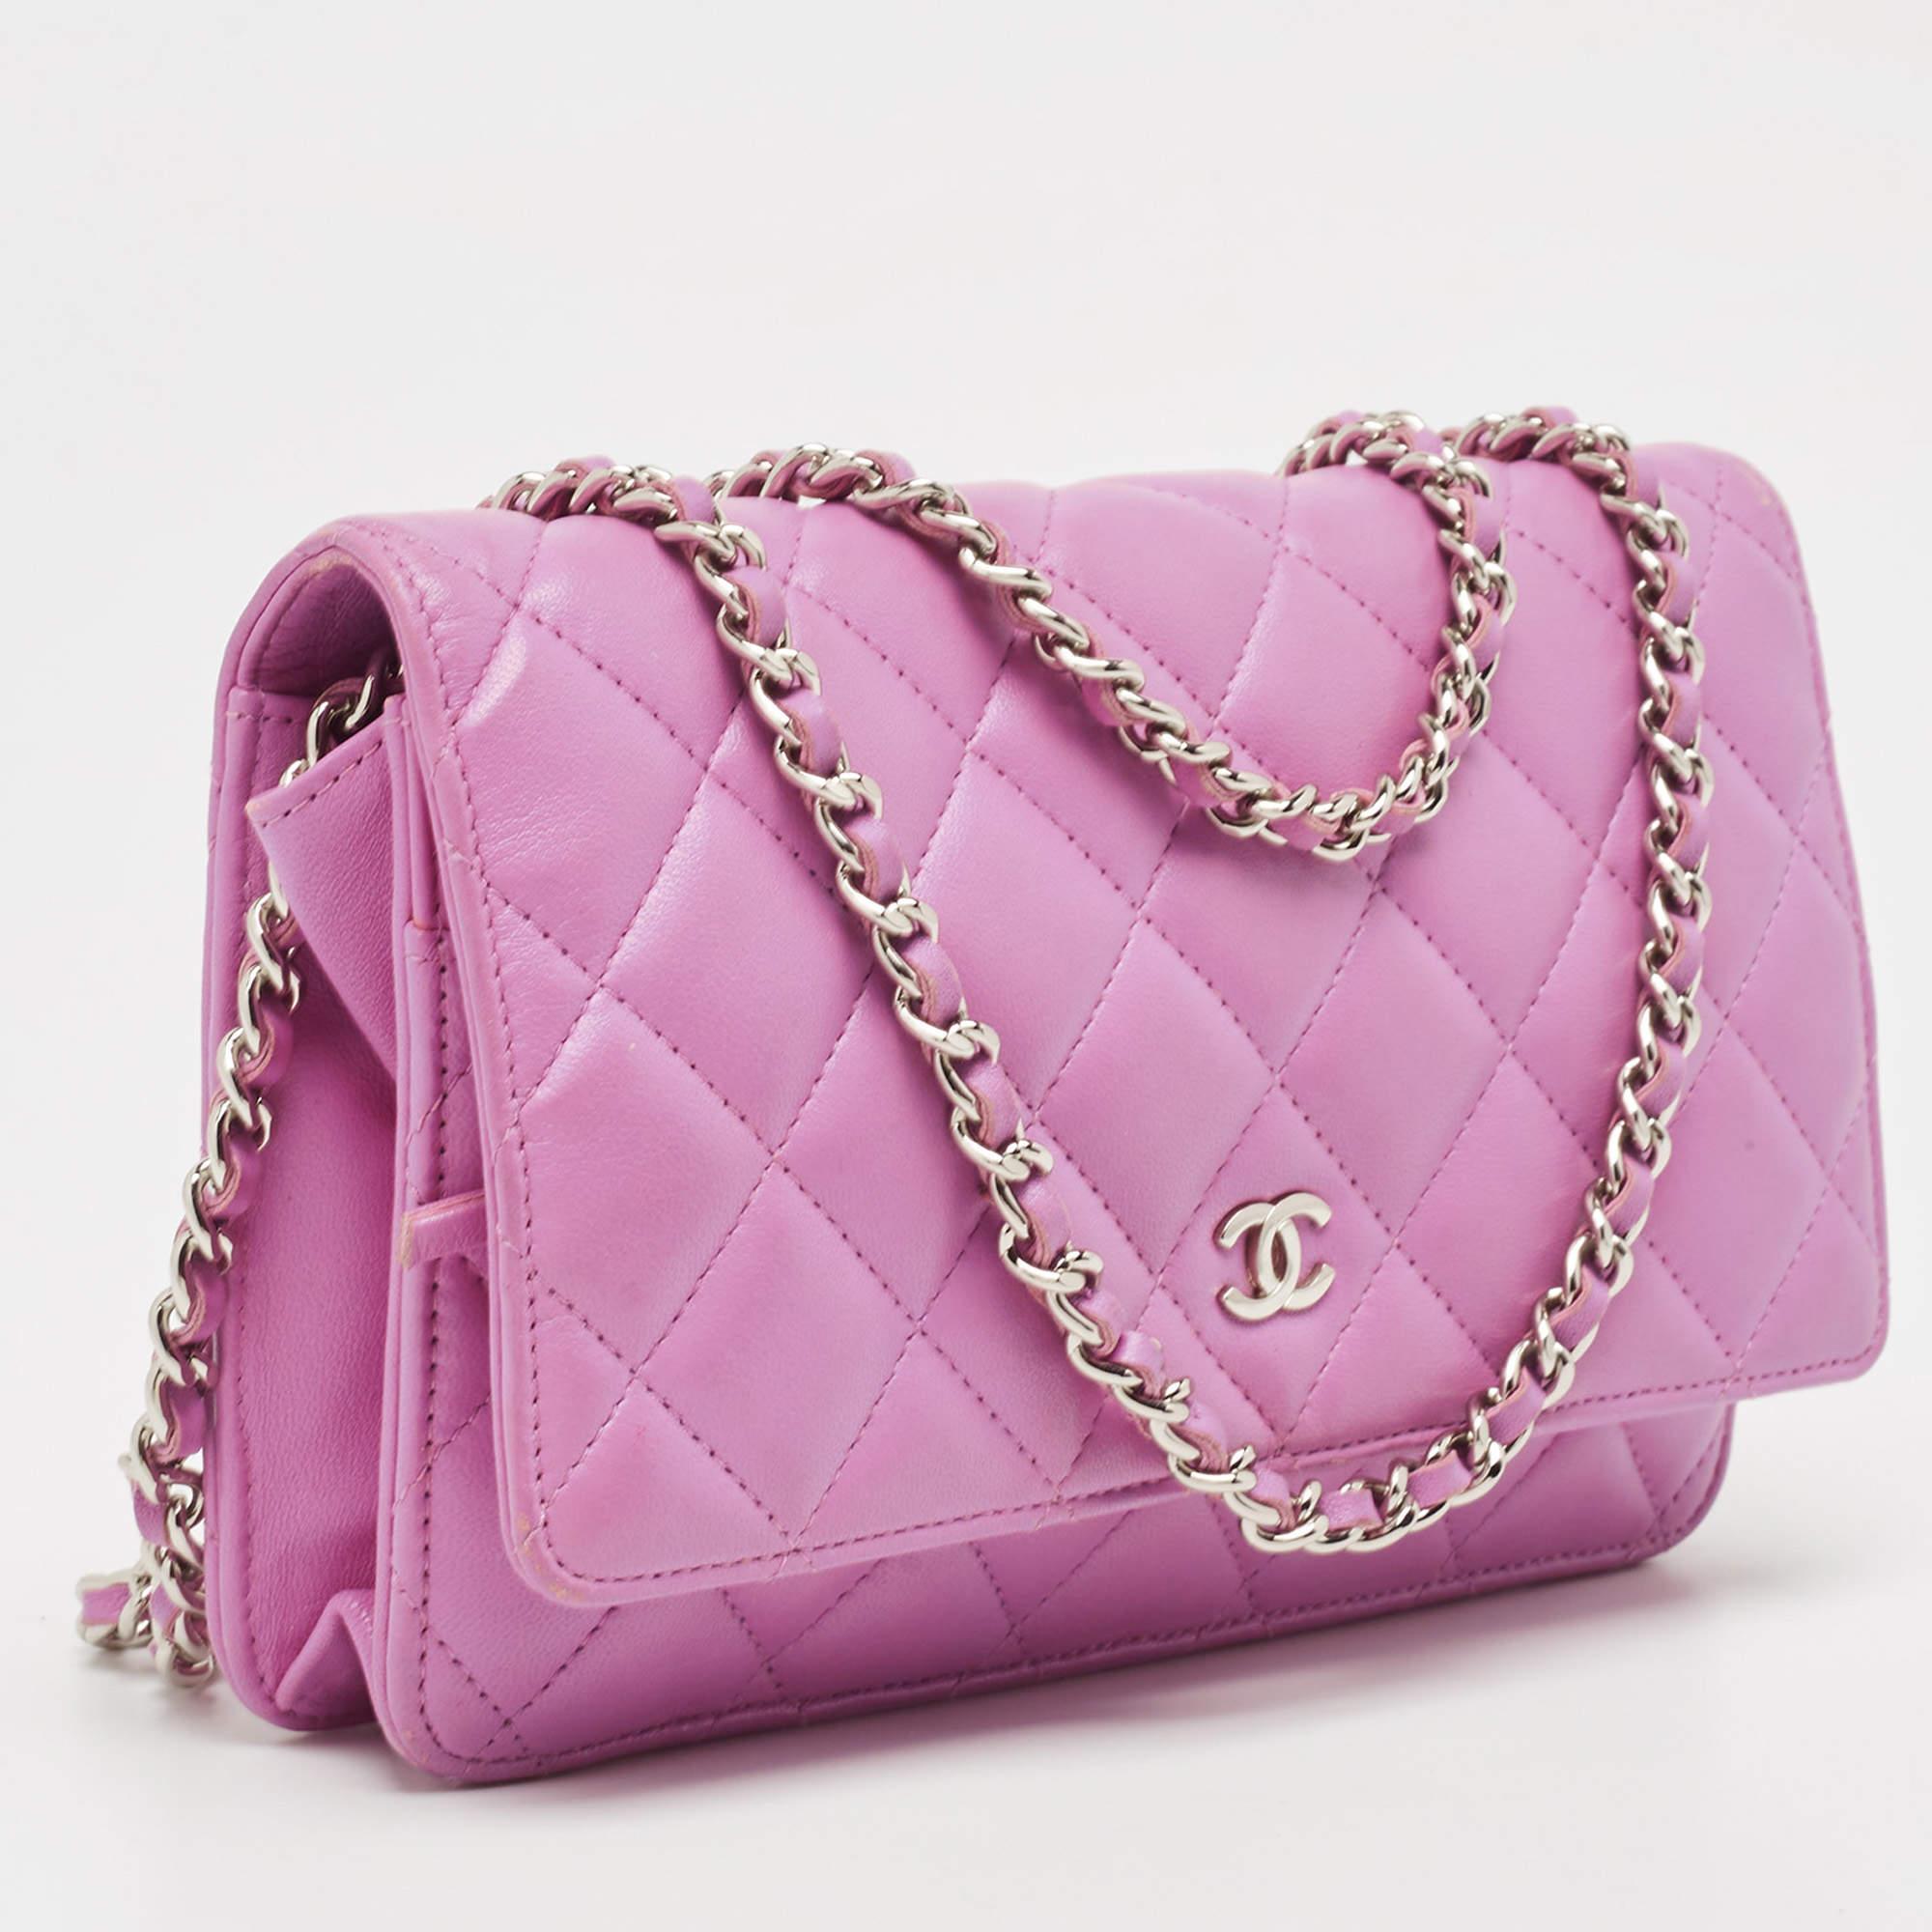 Chanel Purple Quilted Leather WOC Bag 6